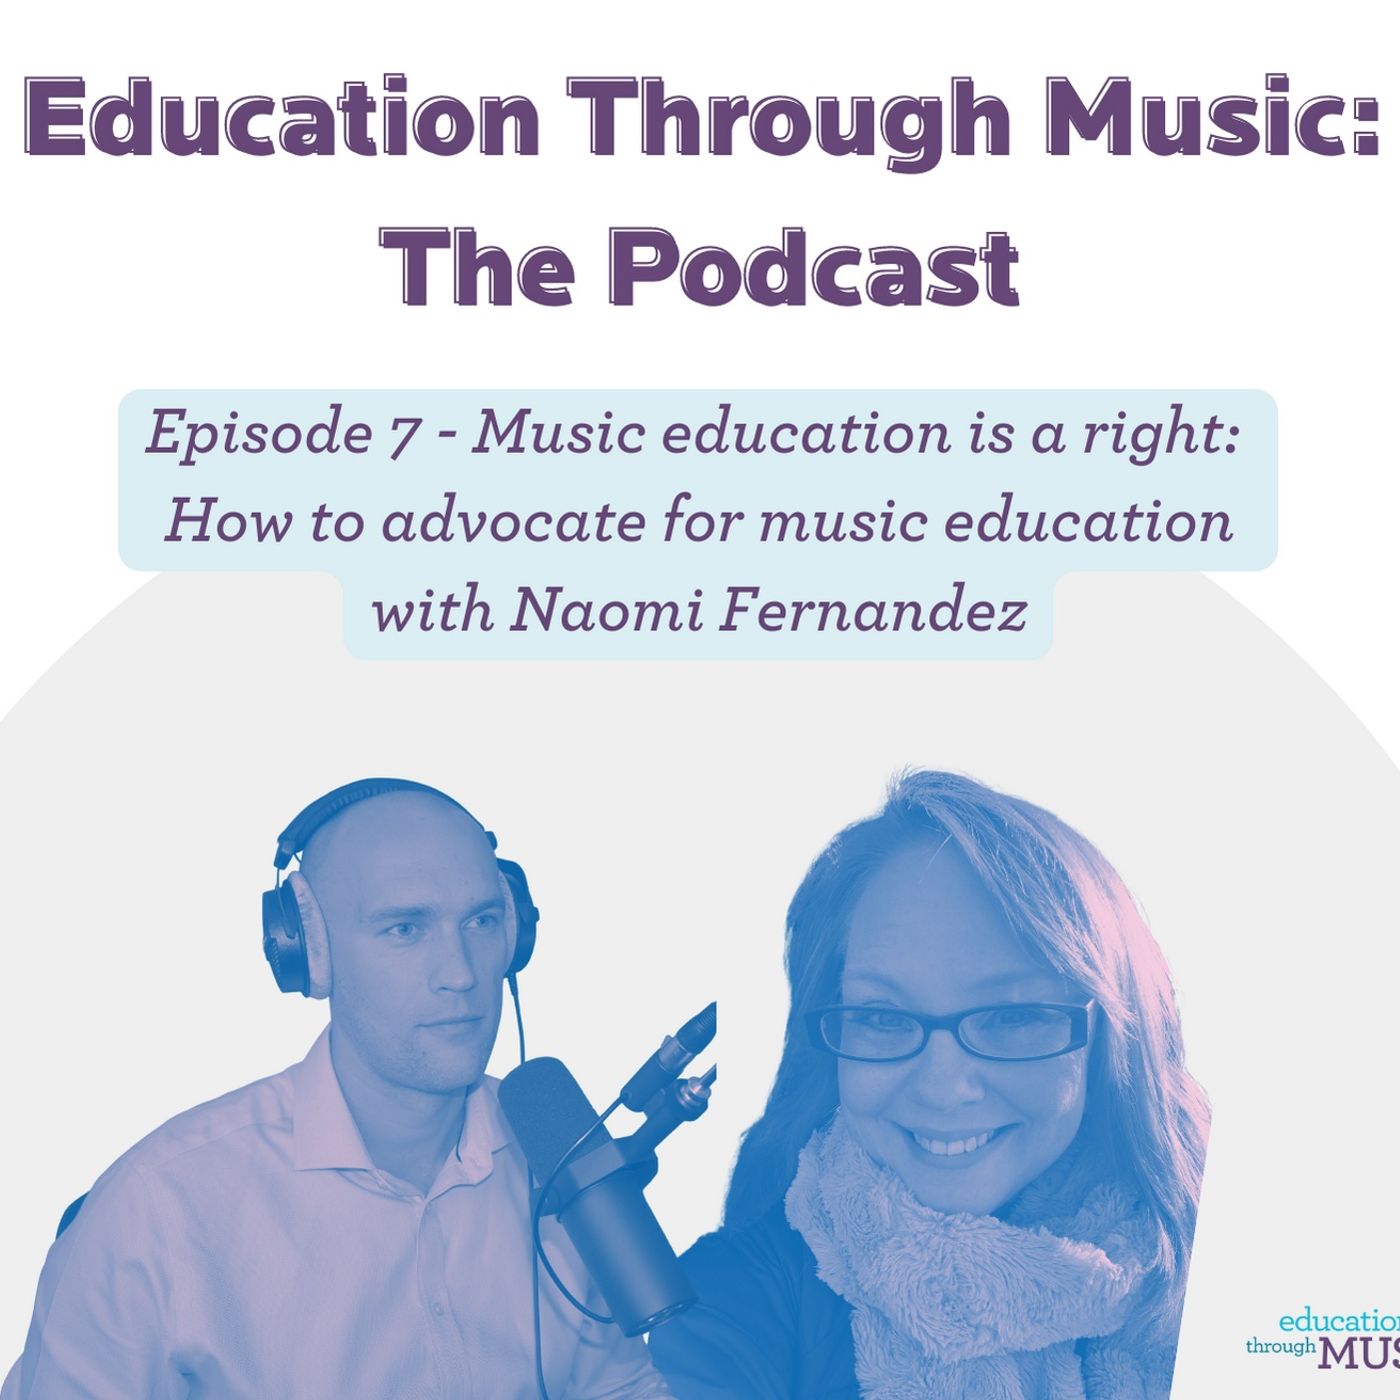 Episode 7: Music education is a right - How to advocate for music education with Naomi Fernandez